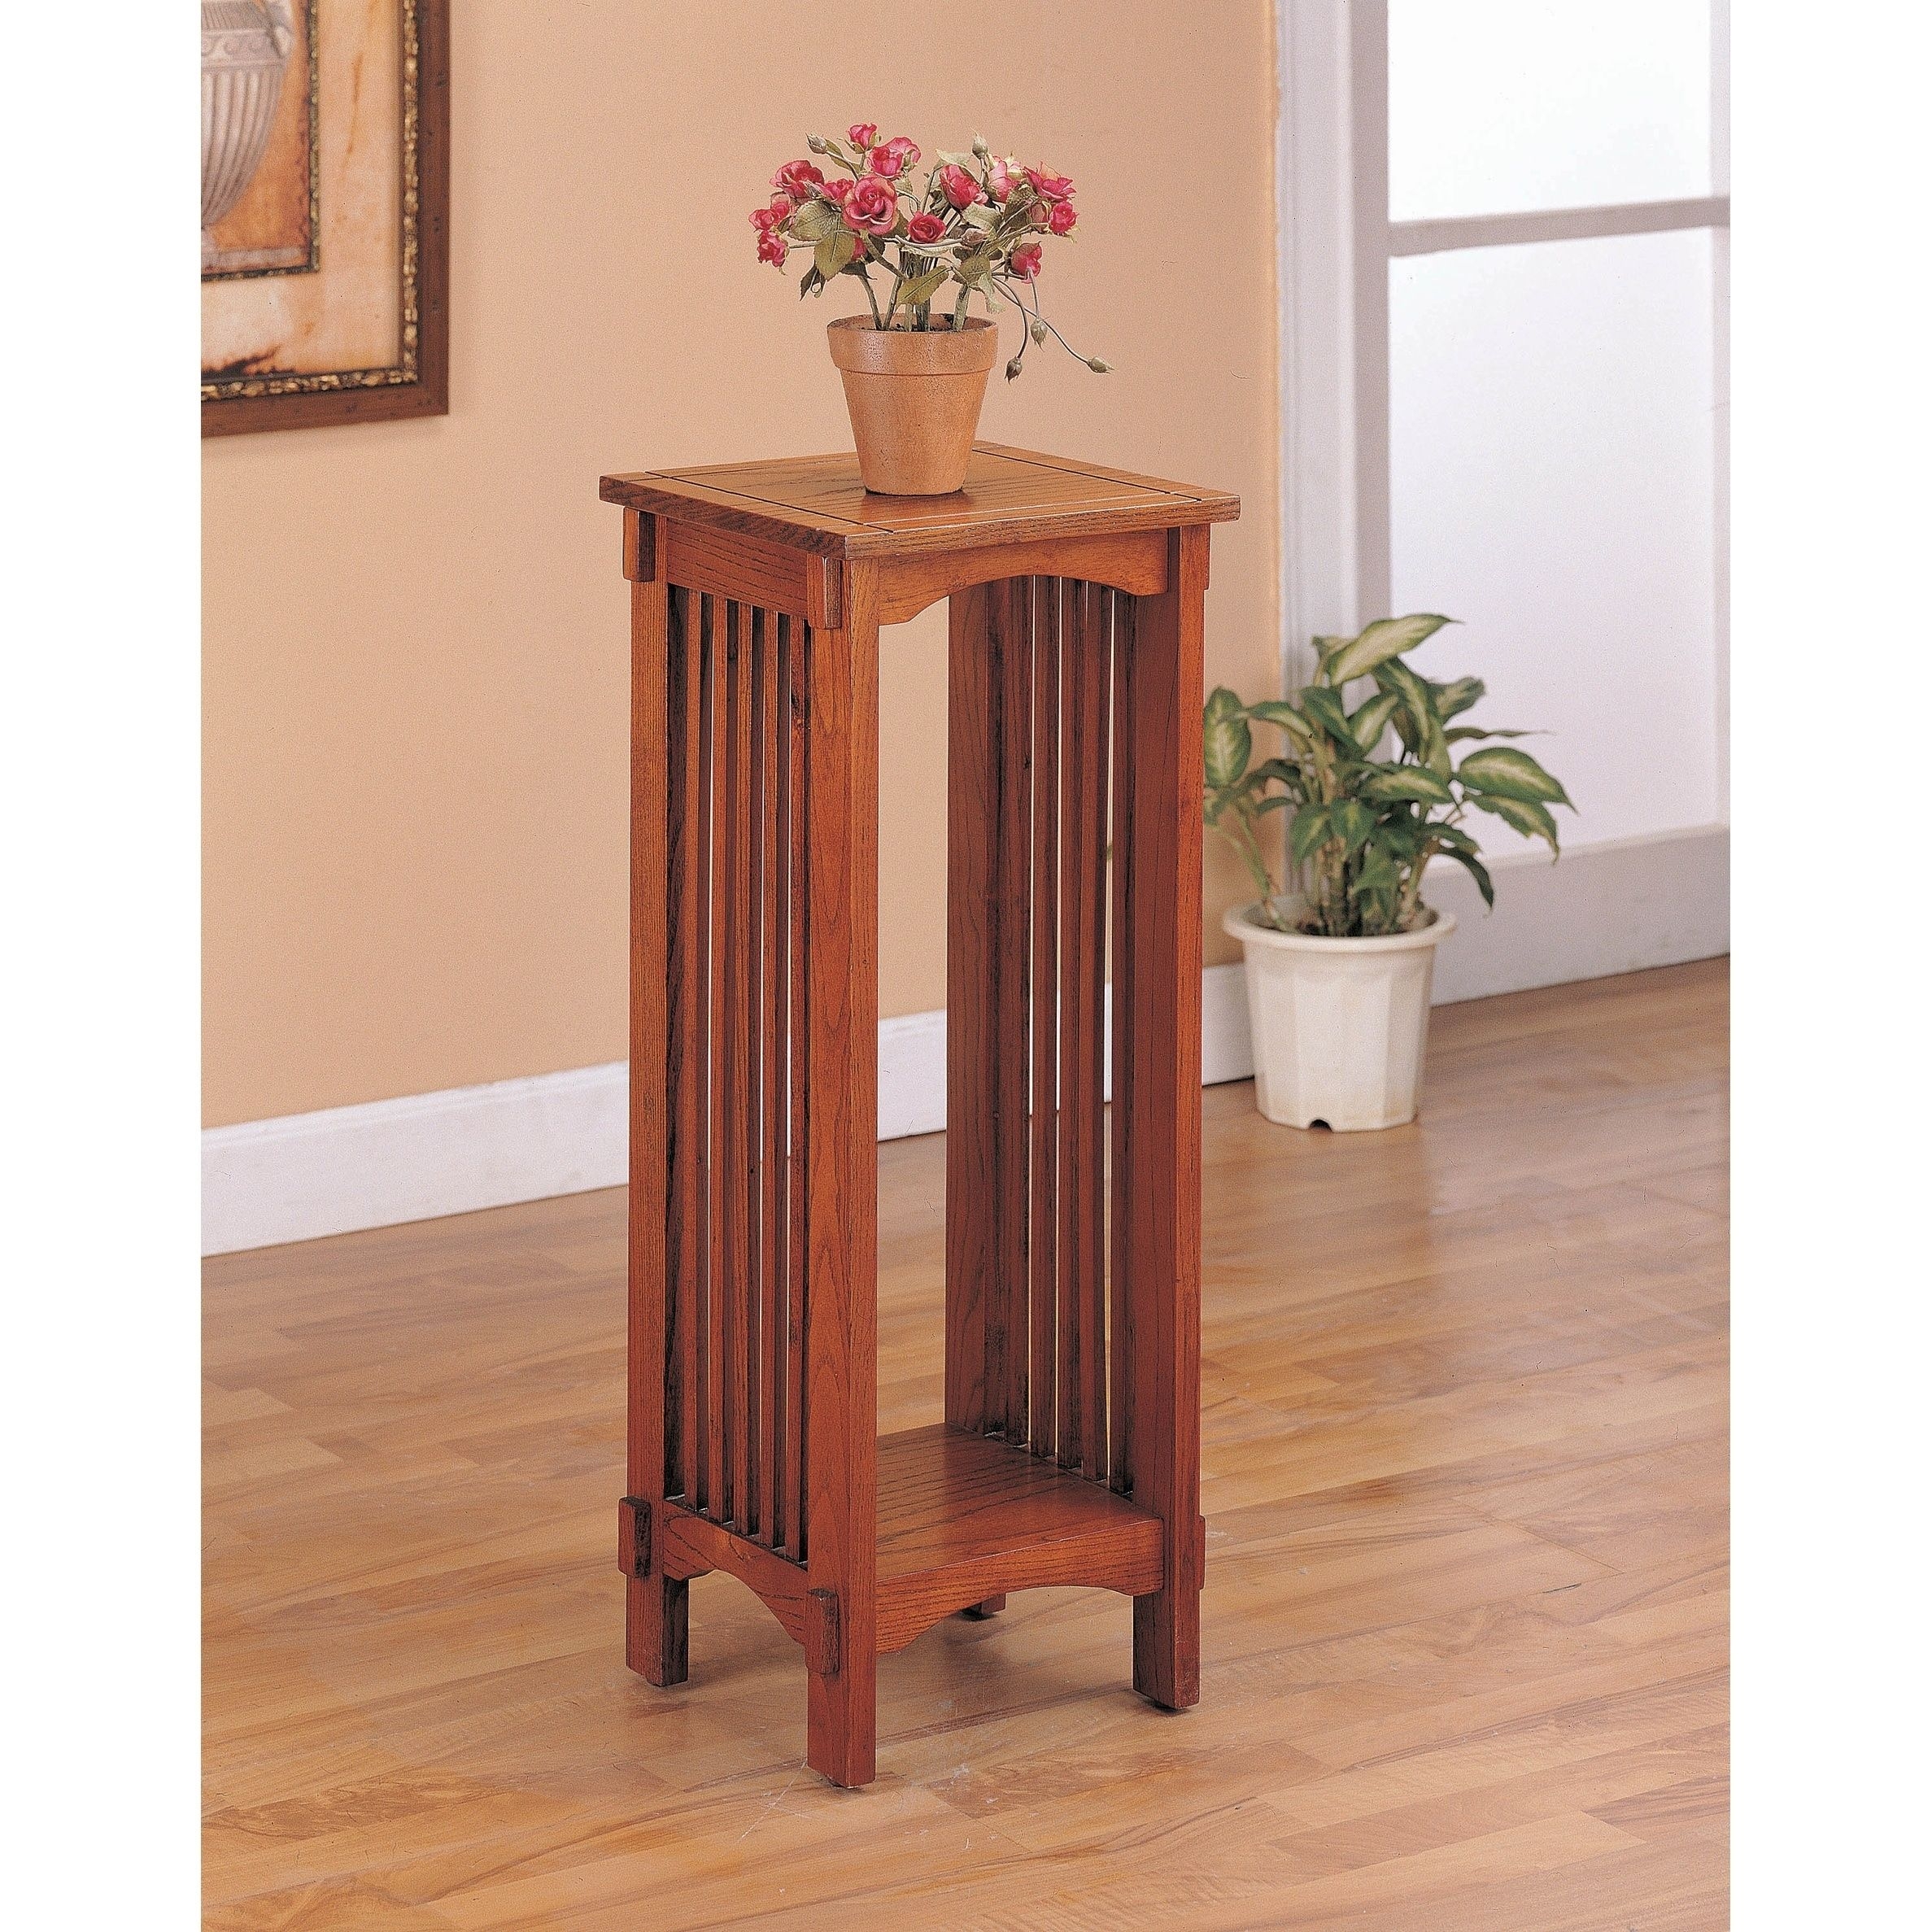 Coaster Home Furnishings Kittitas Plant Stand in Solid Wood, Oak